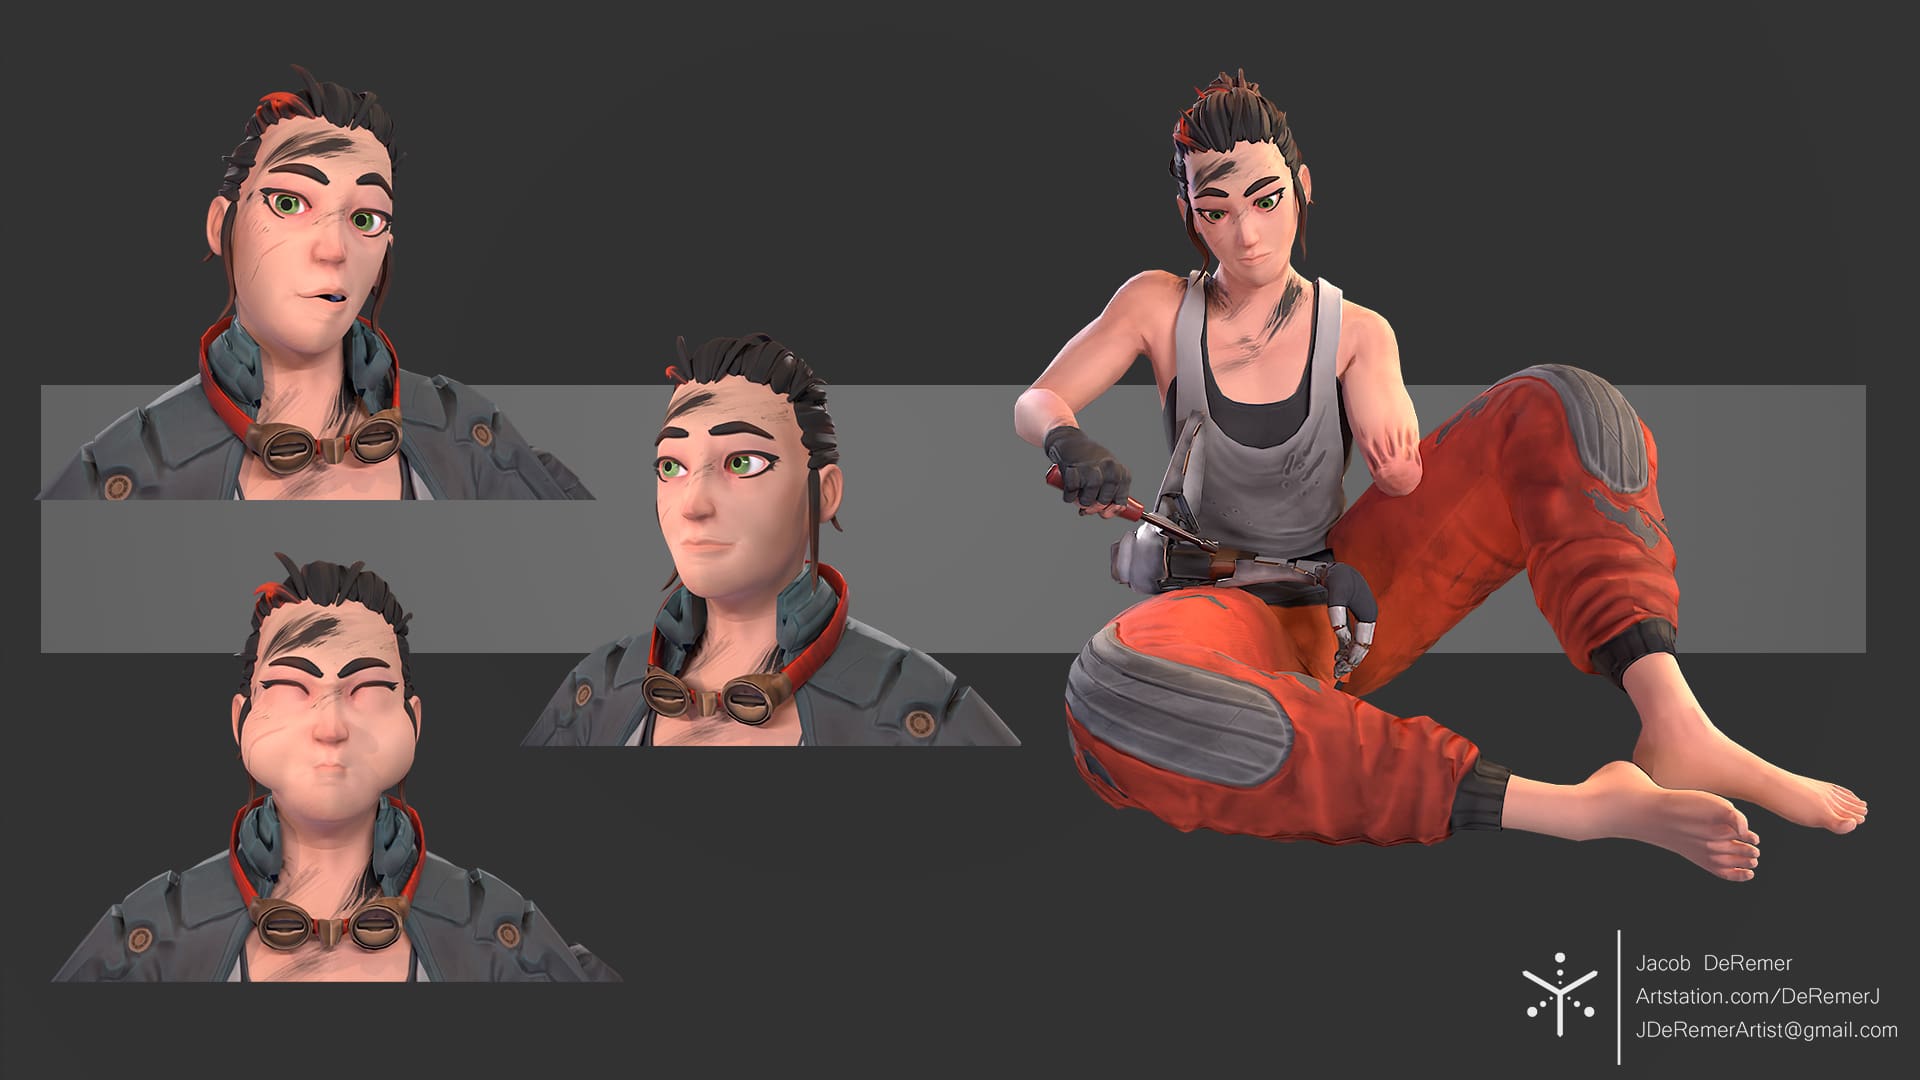 3D model of a woman with dirty orange work pants with grey kneepads and a dirty white tank top. She is barefoot, smeared in soot, and has tied back brown hair with an orange streak. Her right arm is amputated at the elbow, while her left arm wears a leather glove and holds a screwdriver. On the right, she sits on the floor and tinkers with a mechanical arm. On the left, three facial studies show her intrigued, calm, and holding her breath.